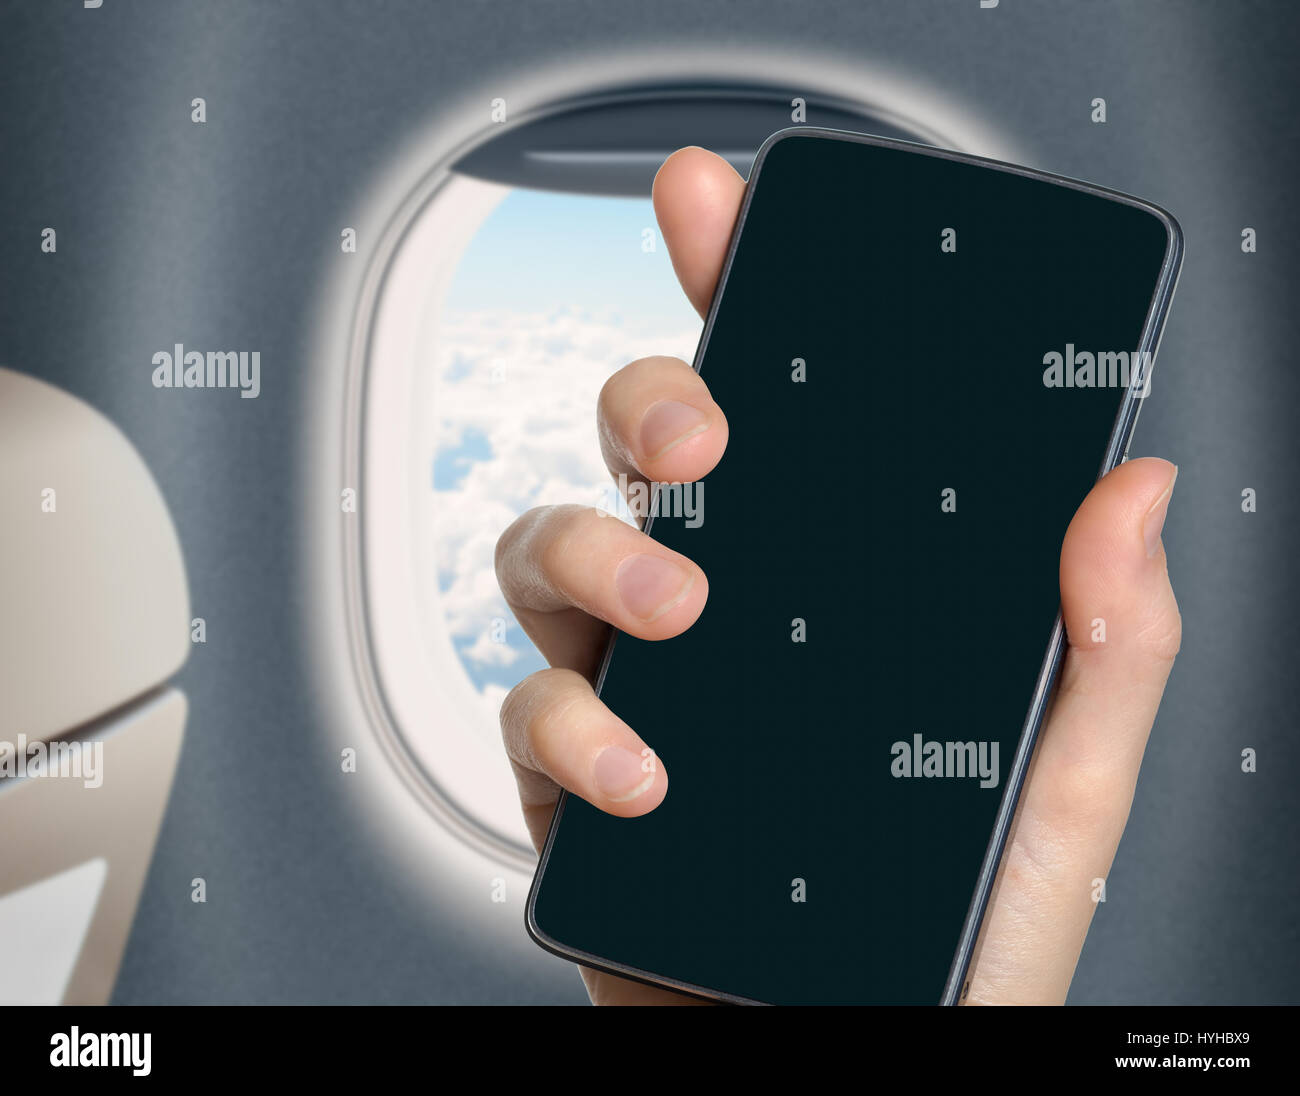 hand with blank mobile phone in airplane or jet interior Stock Photo